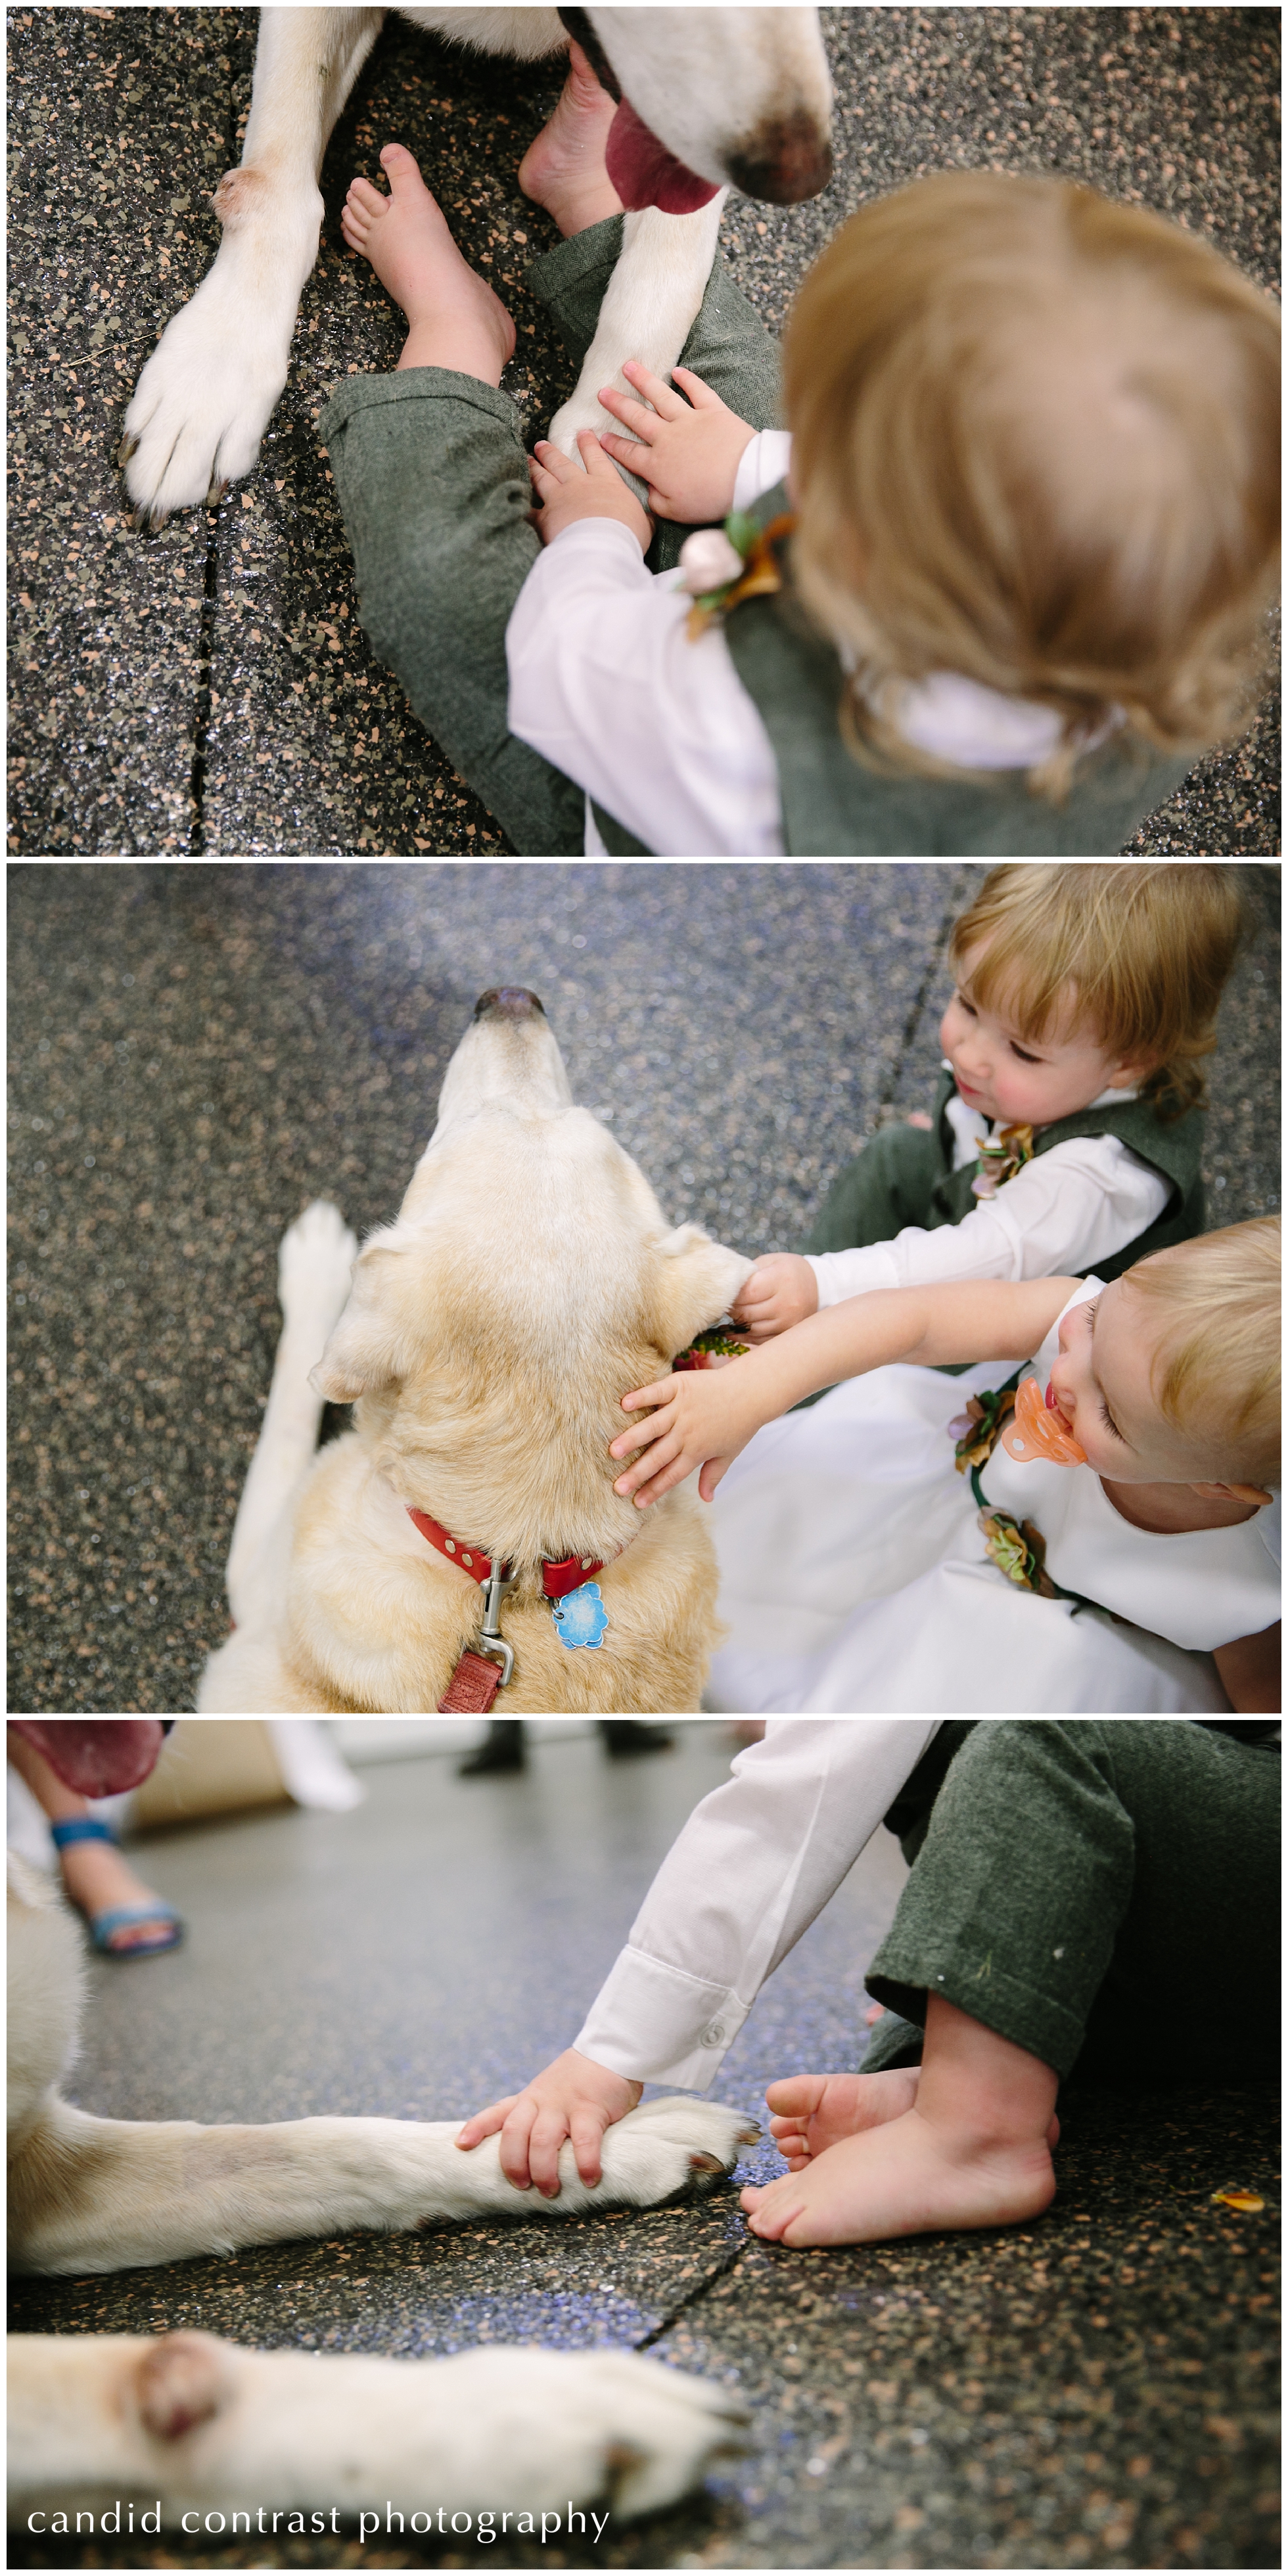 dubuque iowa wedding photographer, cute photos with dogs and kids in your wedding party